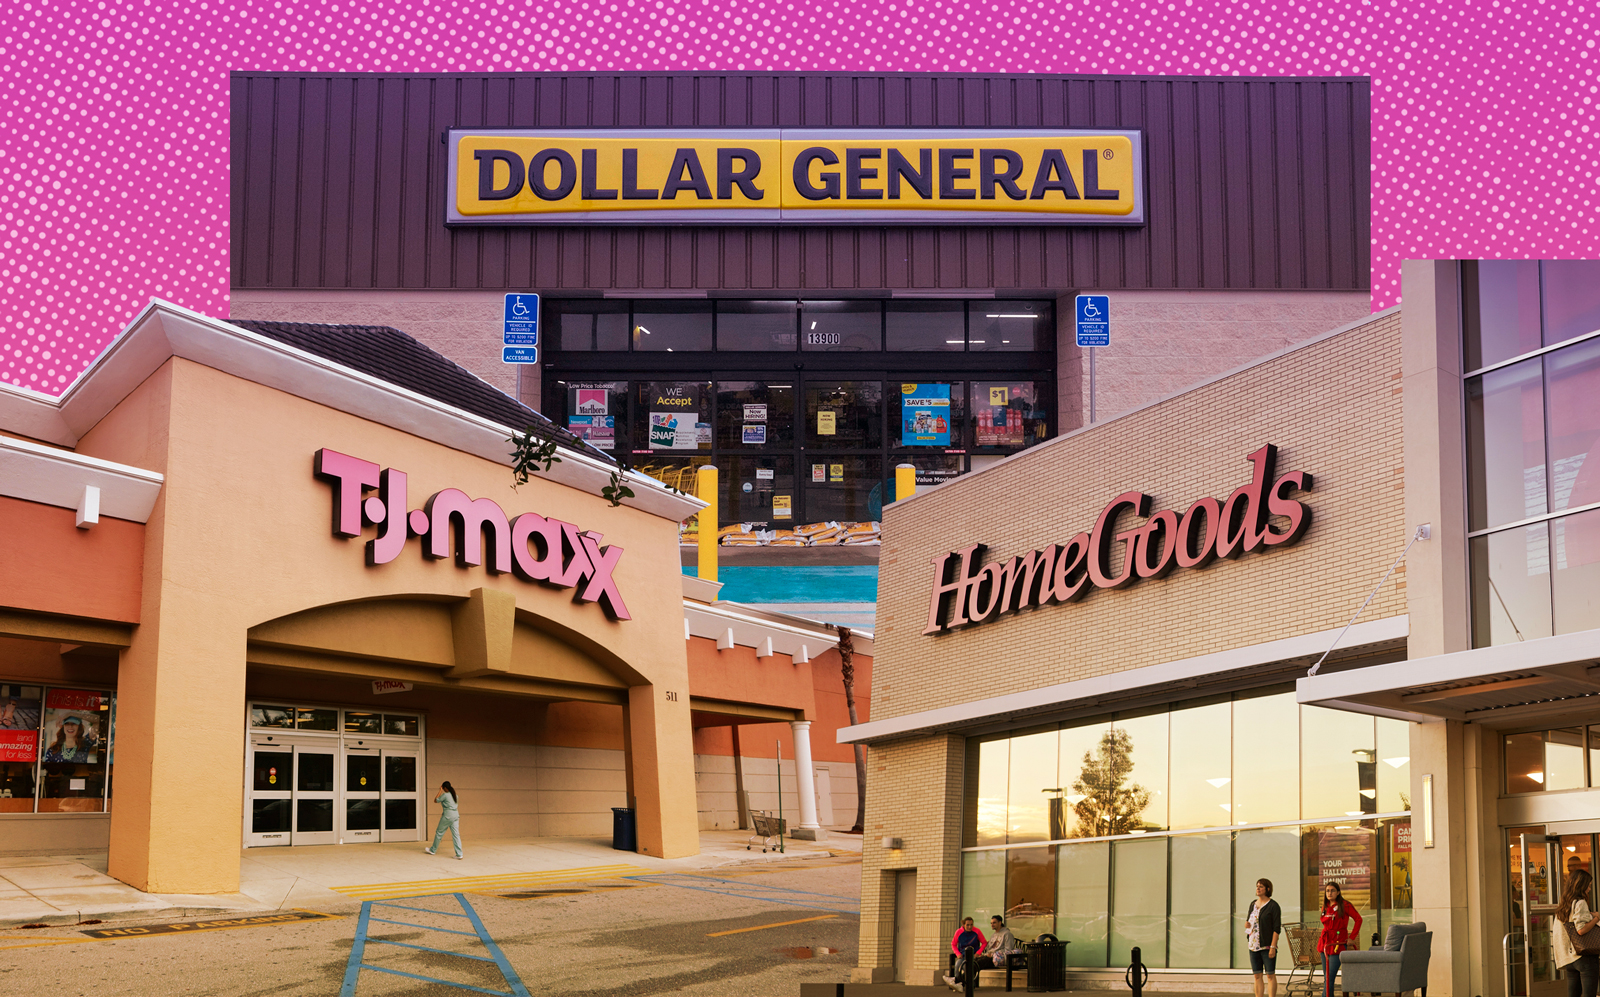 Discount stores like TJ Maxx, Home Goods, and Dollar General are preparing to open more stores even as larger retailers face challenges. (iStock)